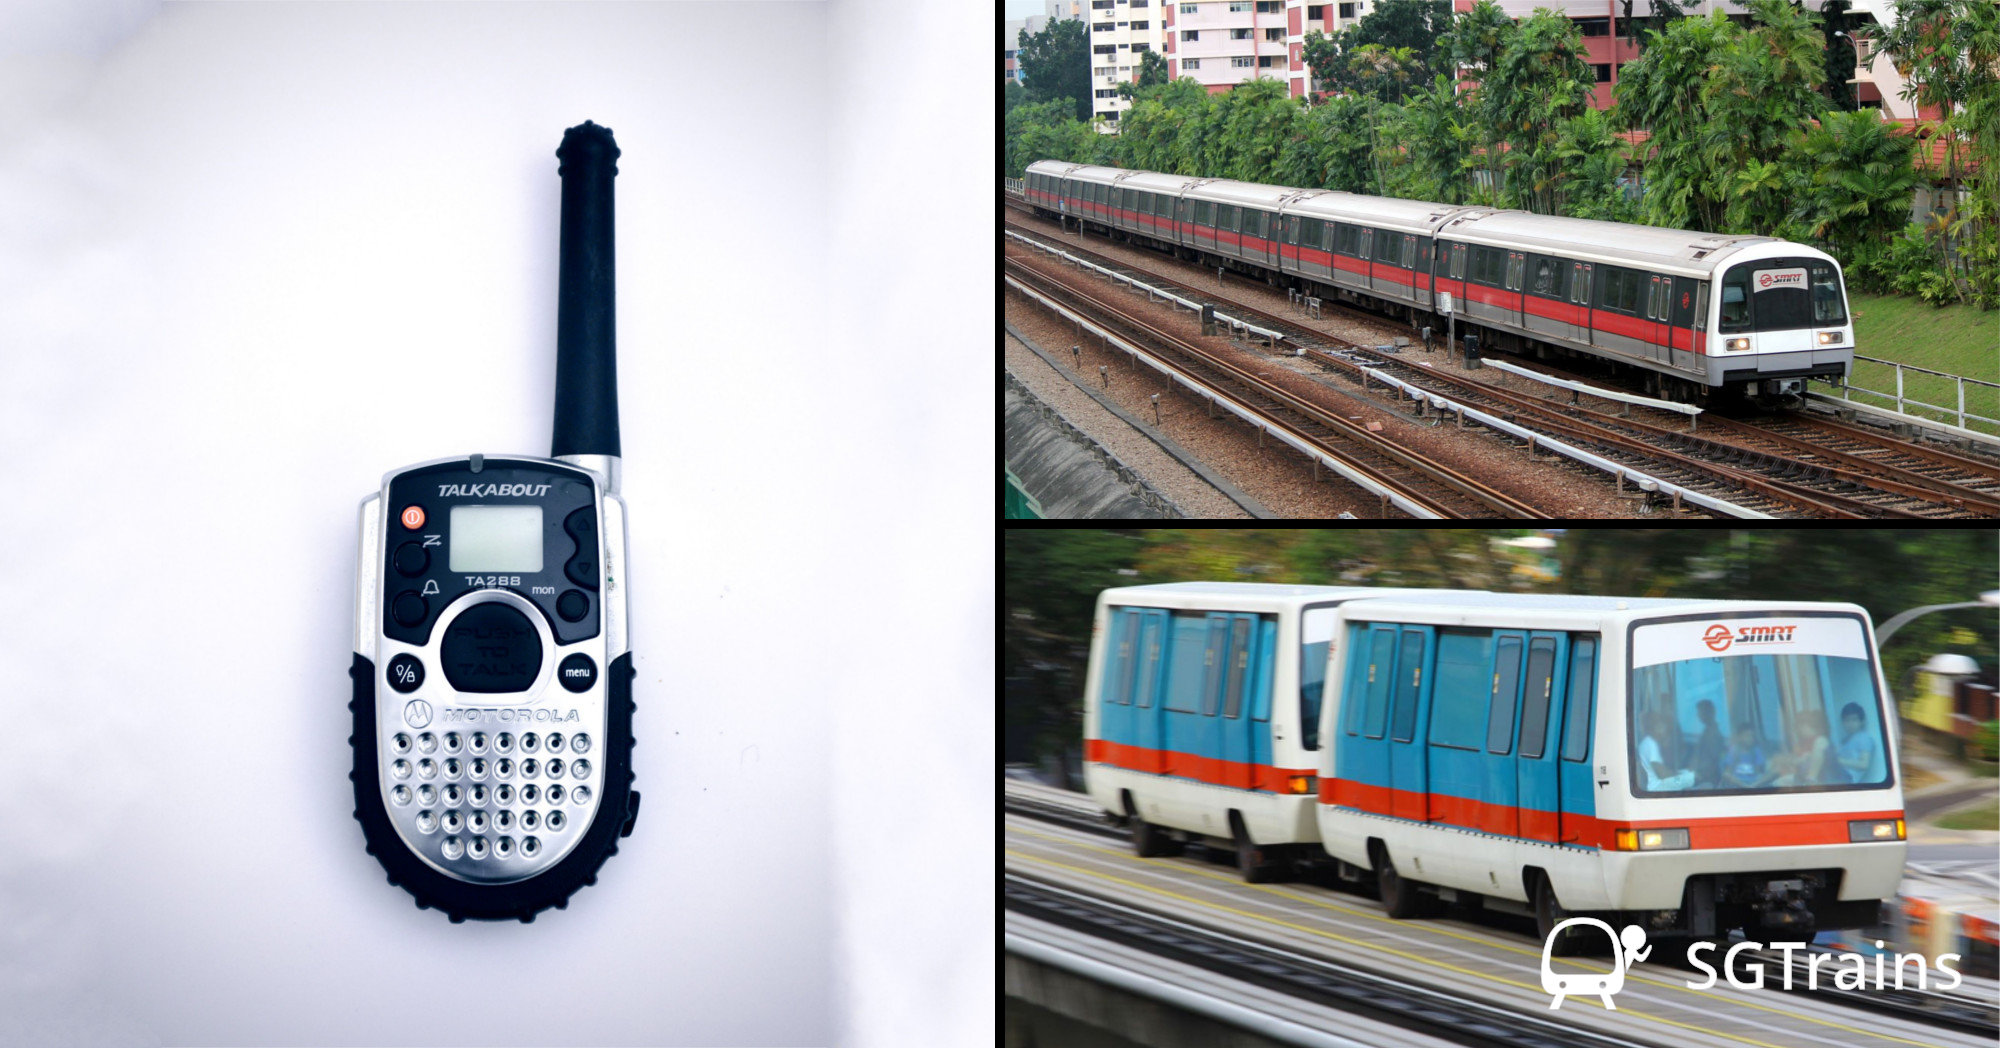 Communications Systems for Older MRT/LRT Lines To Be Upgraded